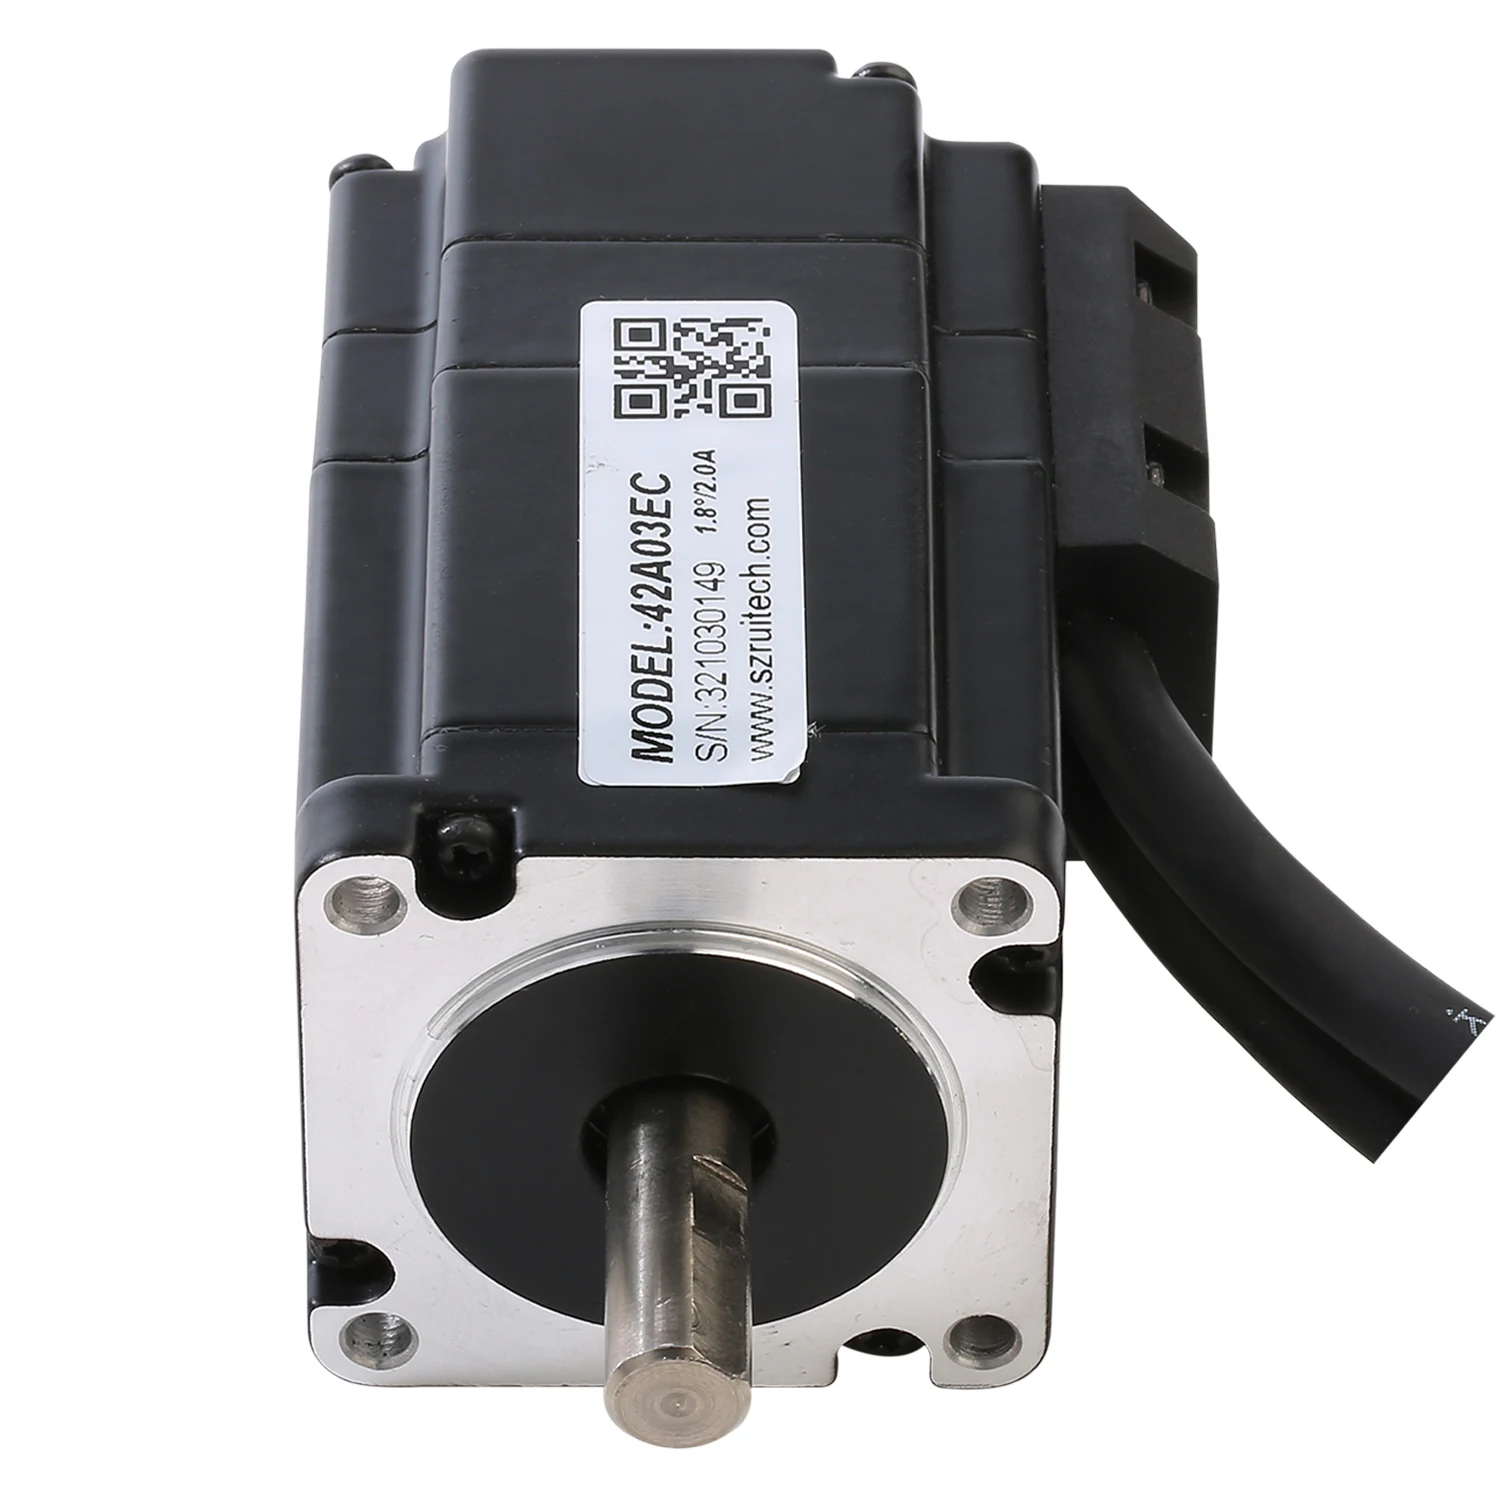 Rtelligent 42A03EC Hybrid 2.0A 0.3 N.M 42*42mm 2 Phase Closed Loop Stepper Motor Nema17 with Encoder and 30cm Cable